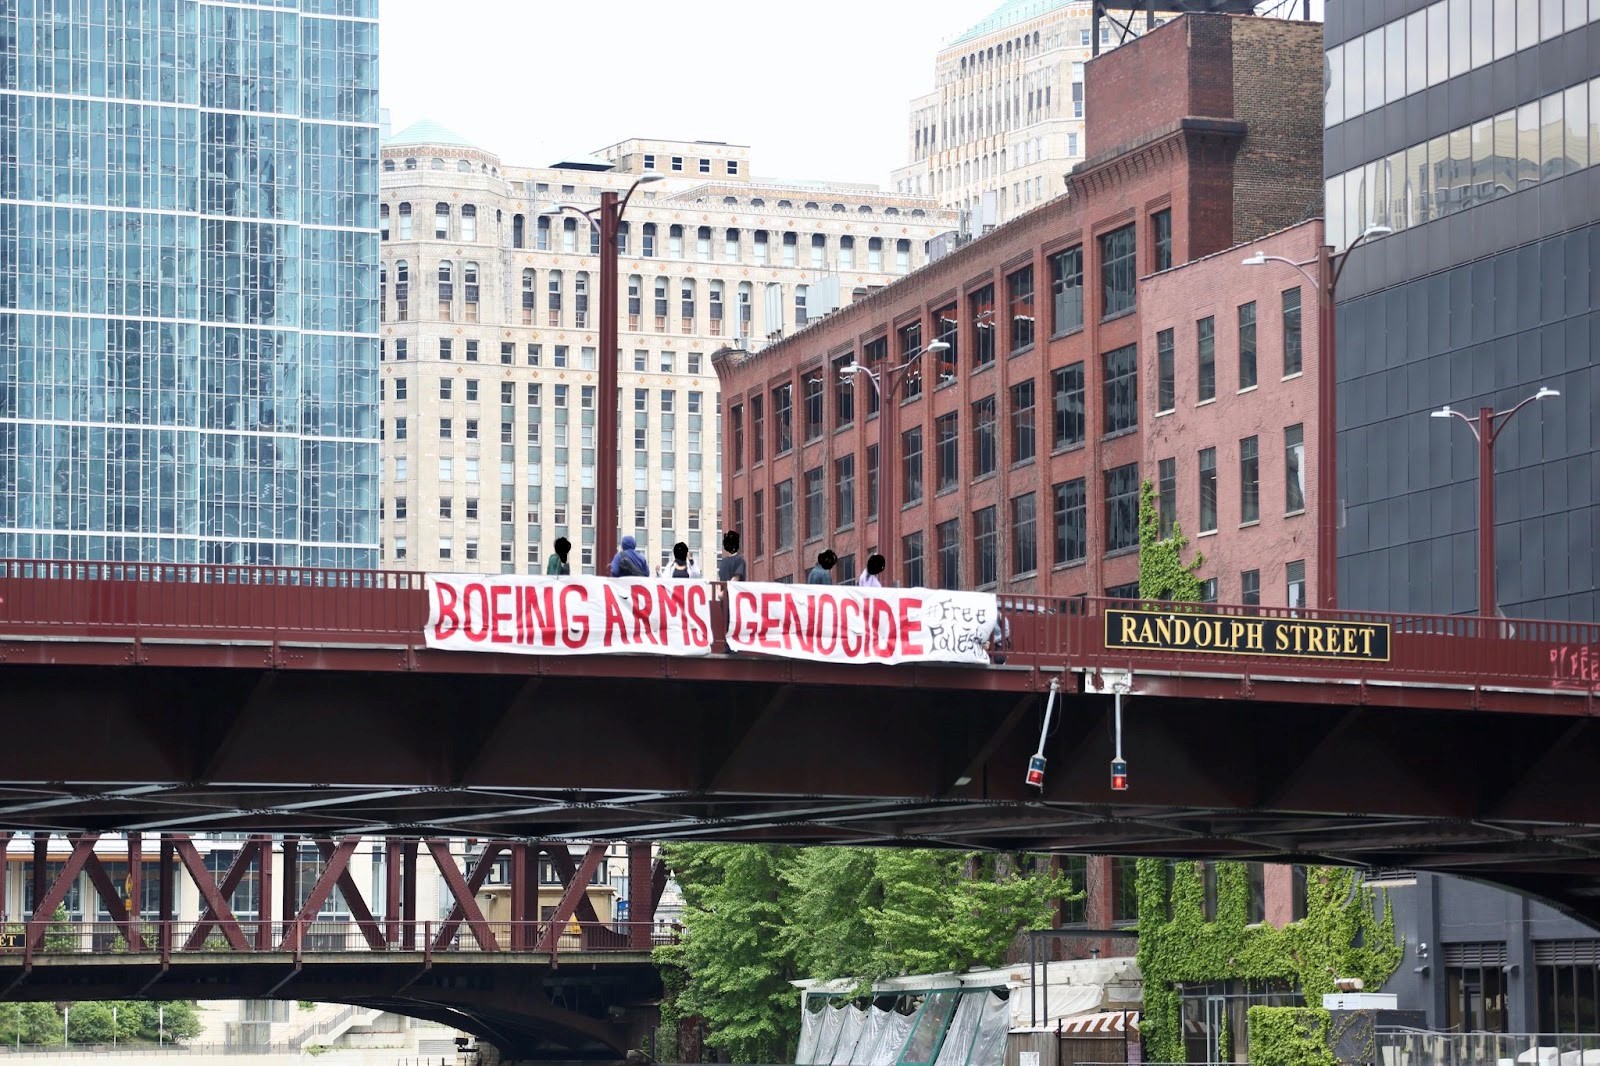 Boeing Arms Genocide protest sign over Randolph Street bridge in Chicago